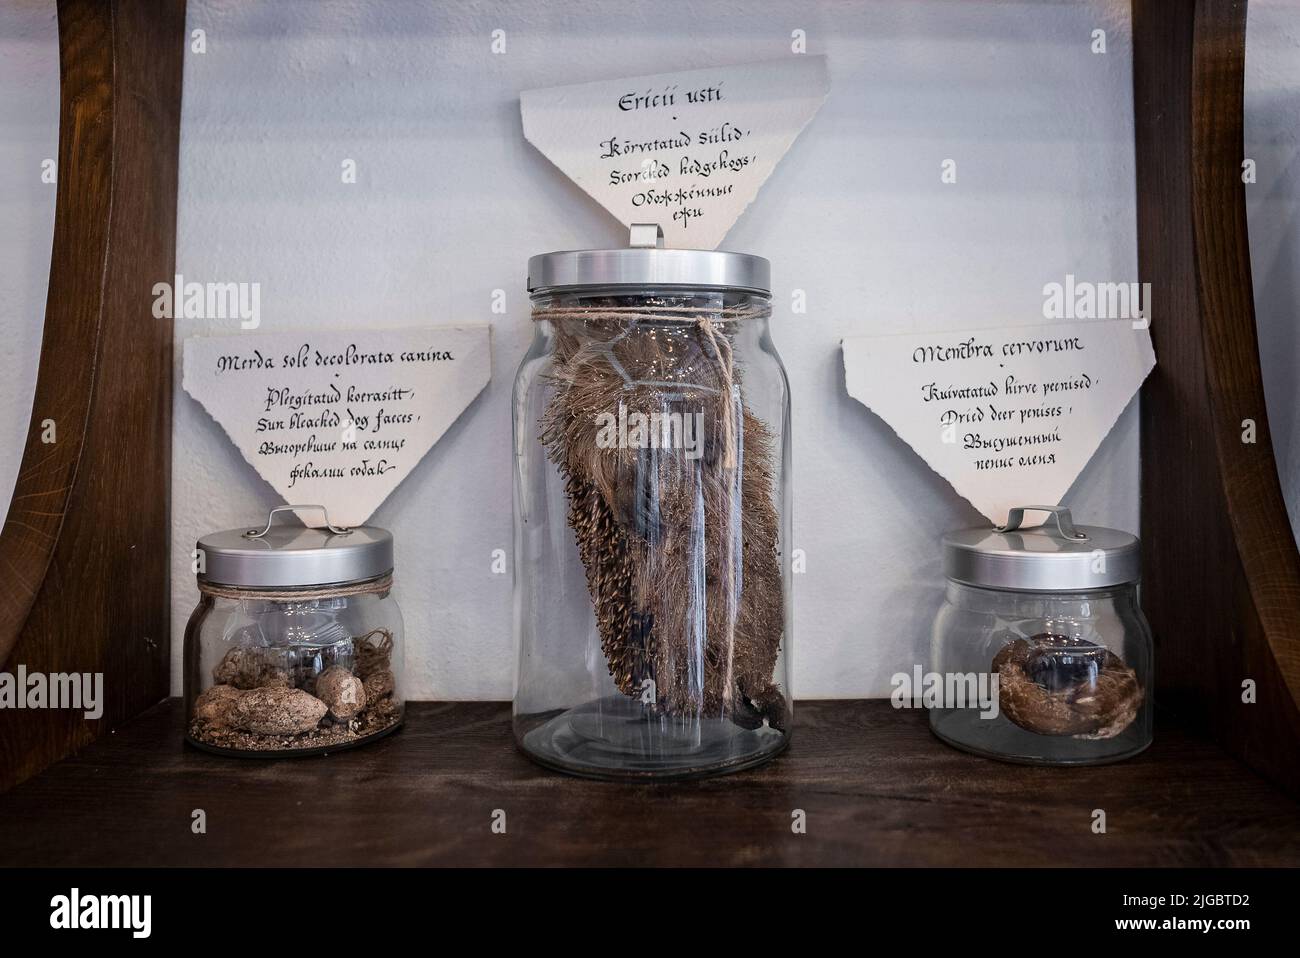 Various objects in jars with labels on shelf at old pharmacy museum in town Stock Photo